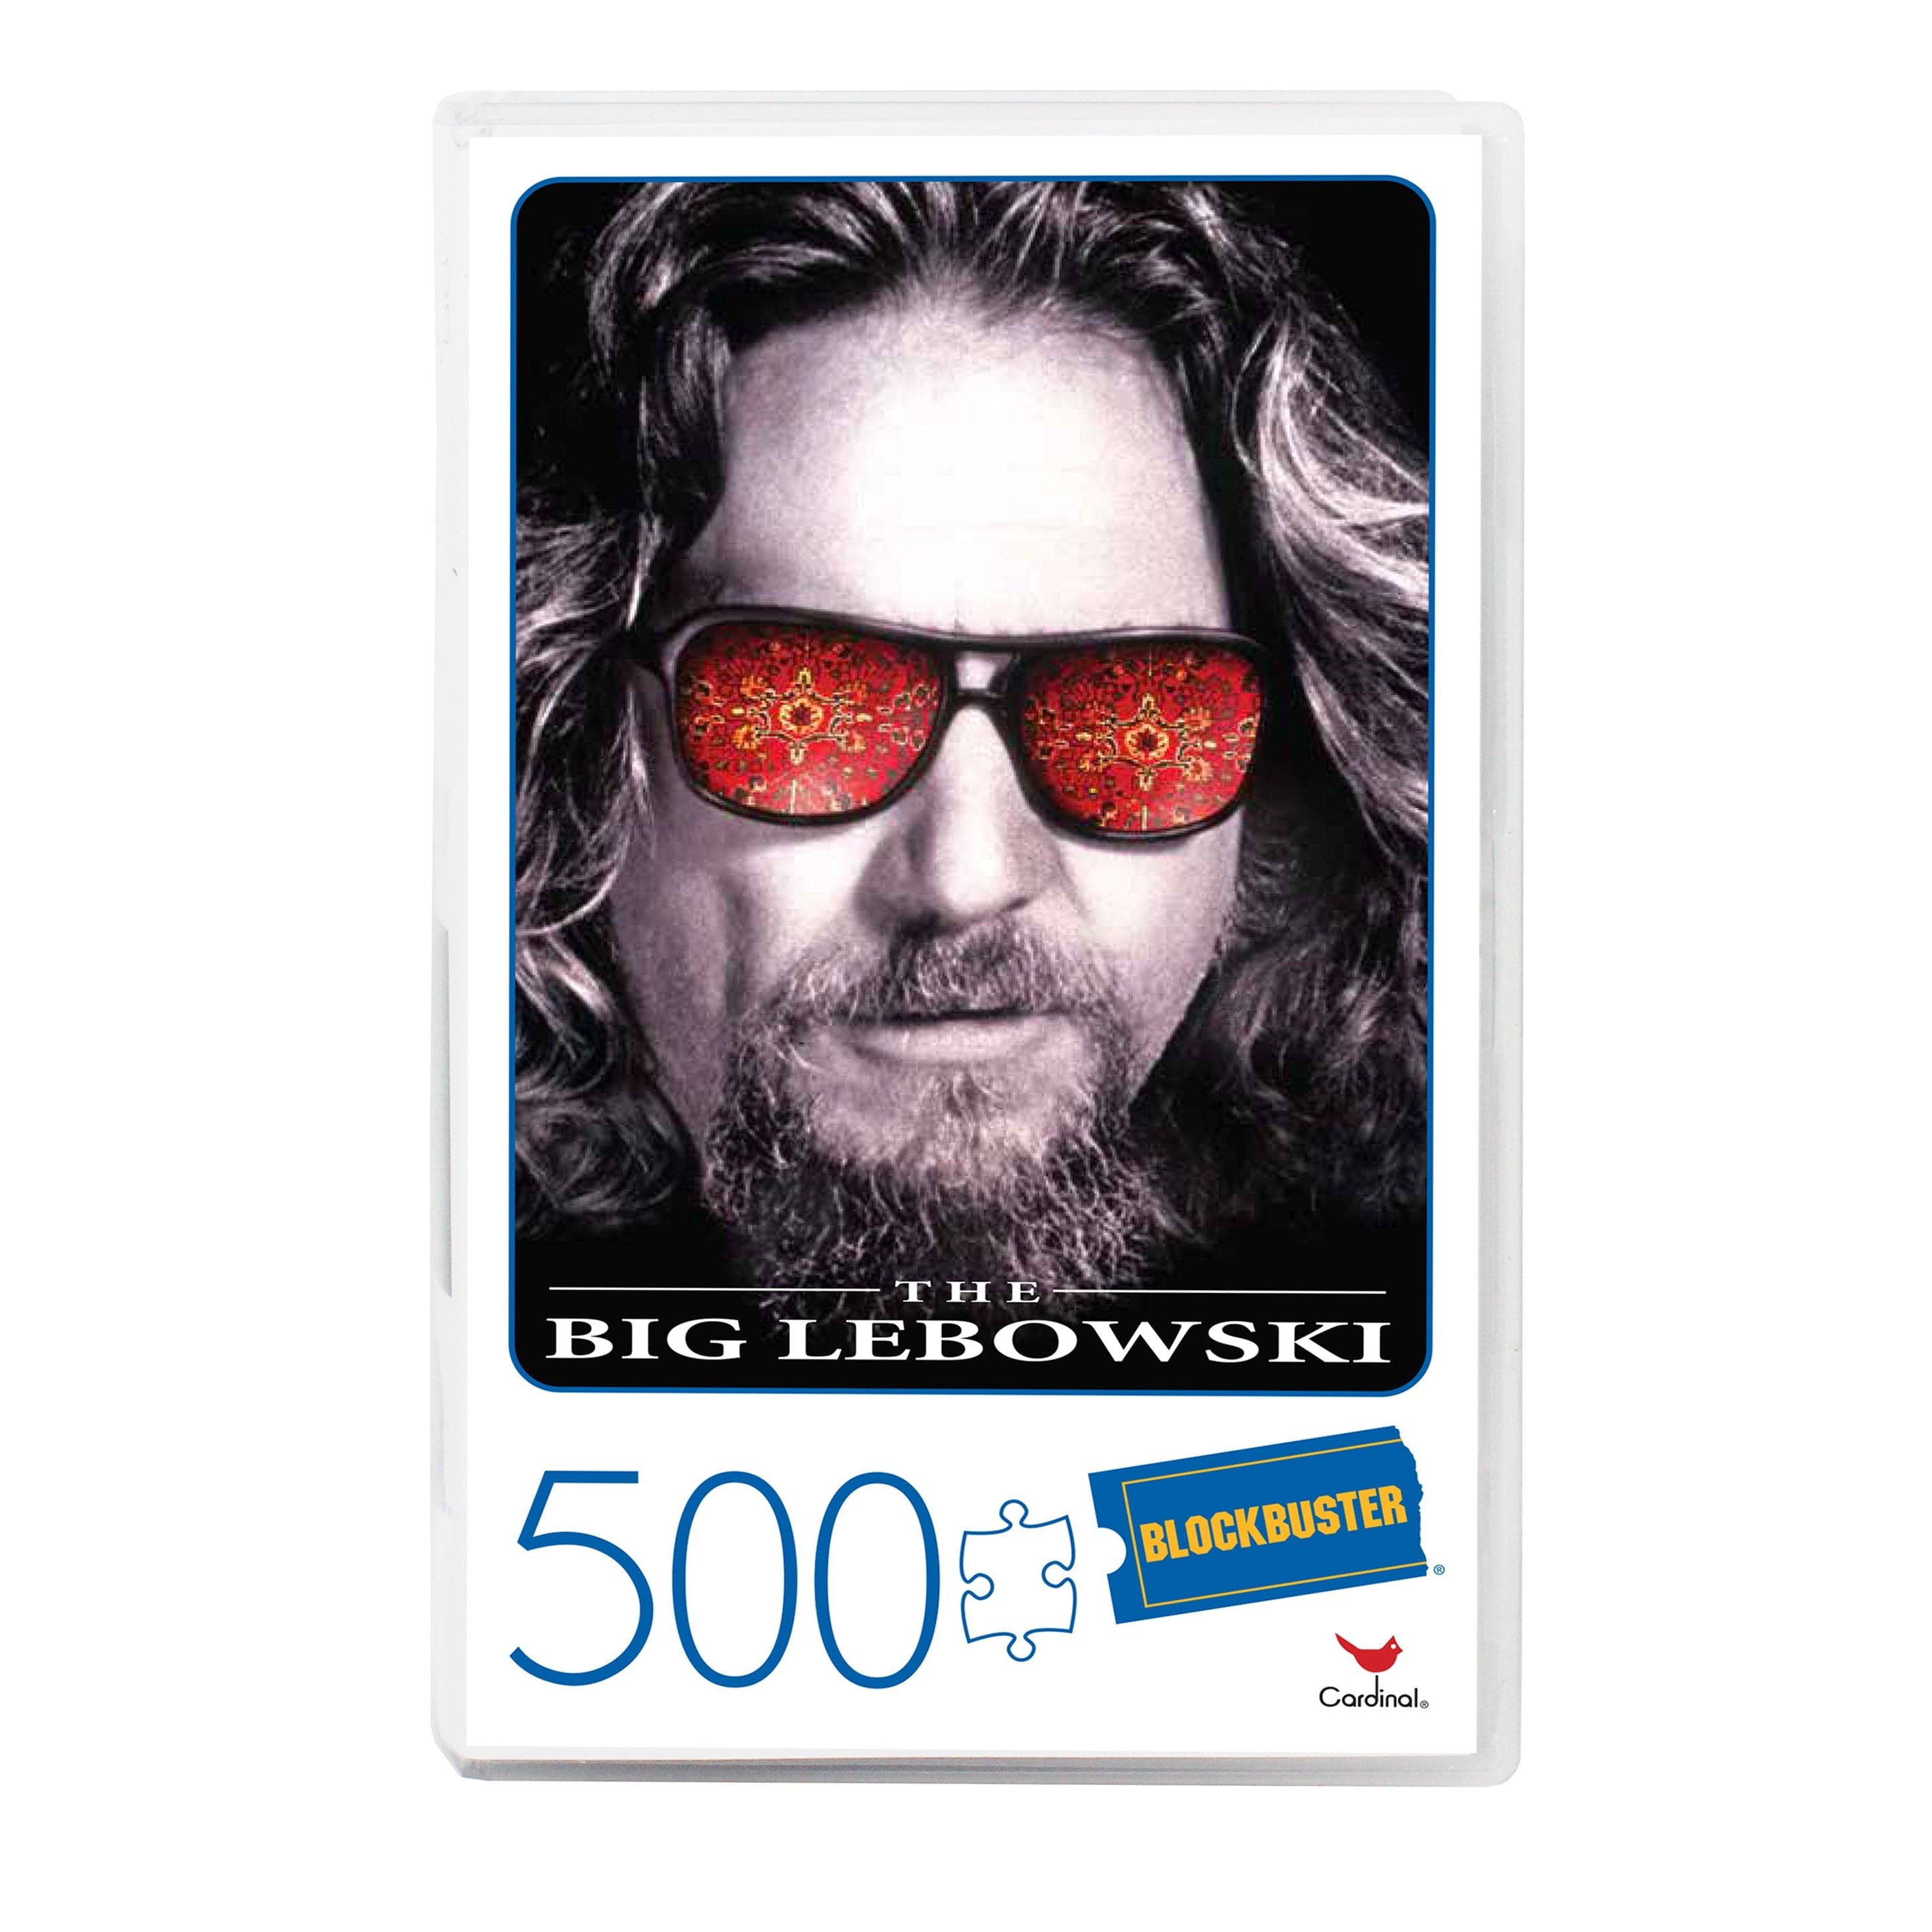 Spin Master-Blockbuster VHS Video Case Puzzles - The Big Lebowski - 500 Pieces-6059000-Legacy Toys